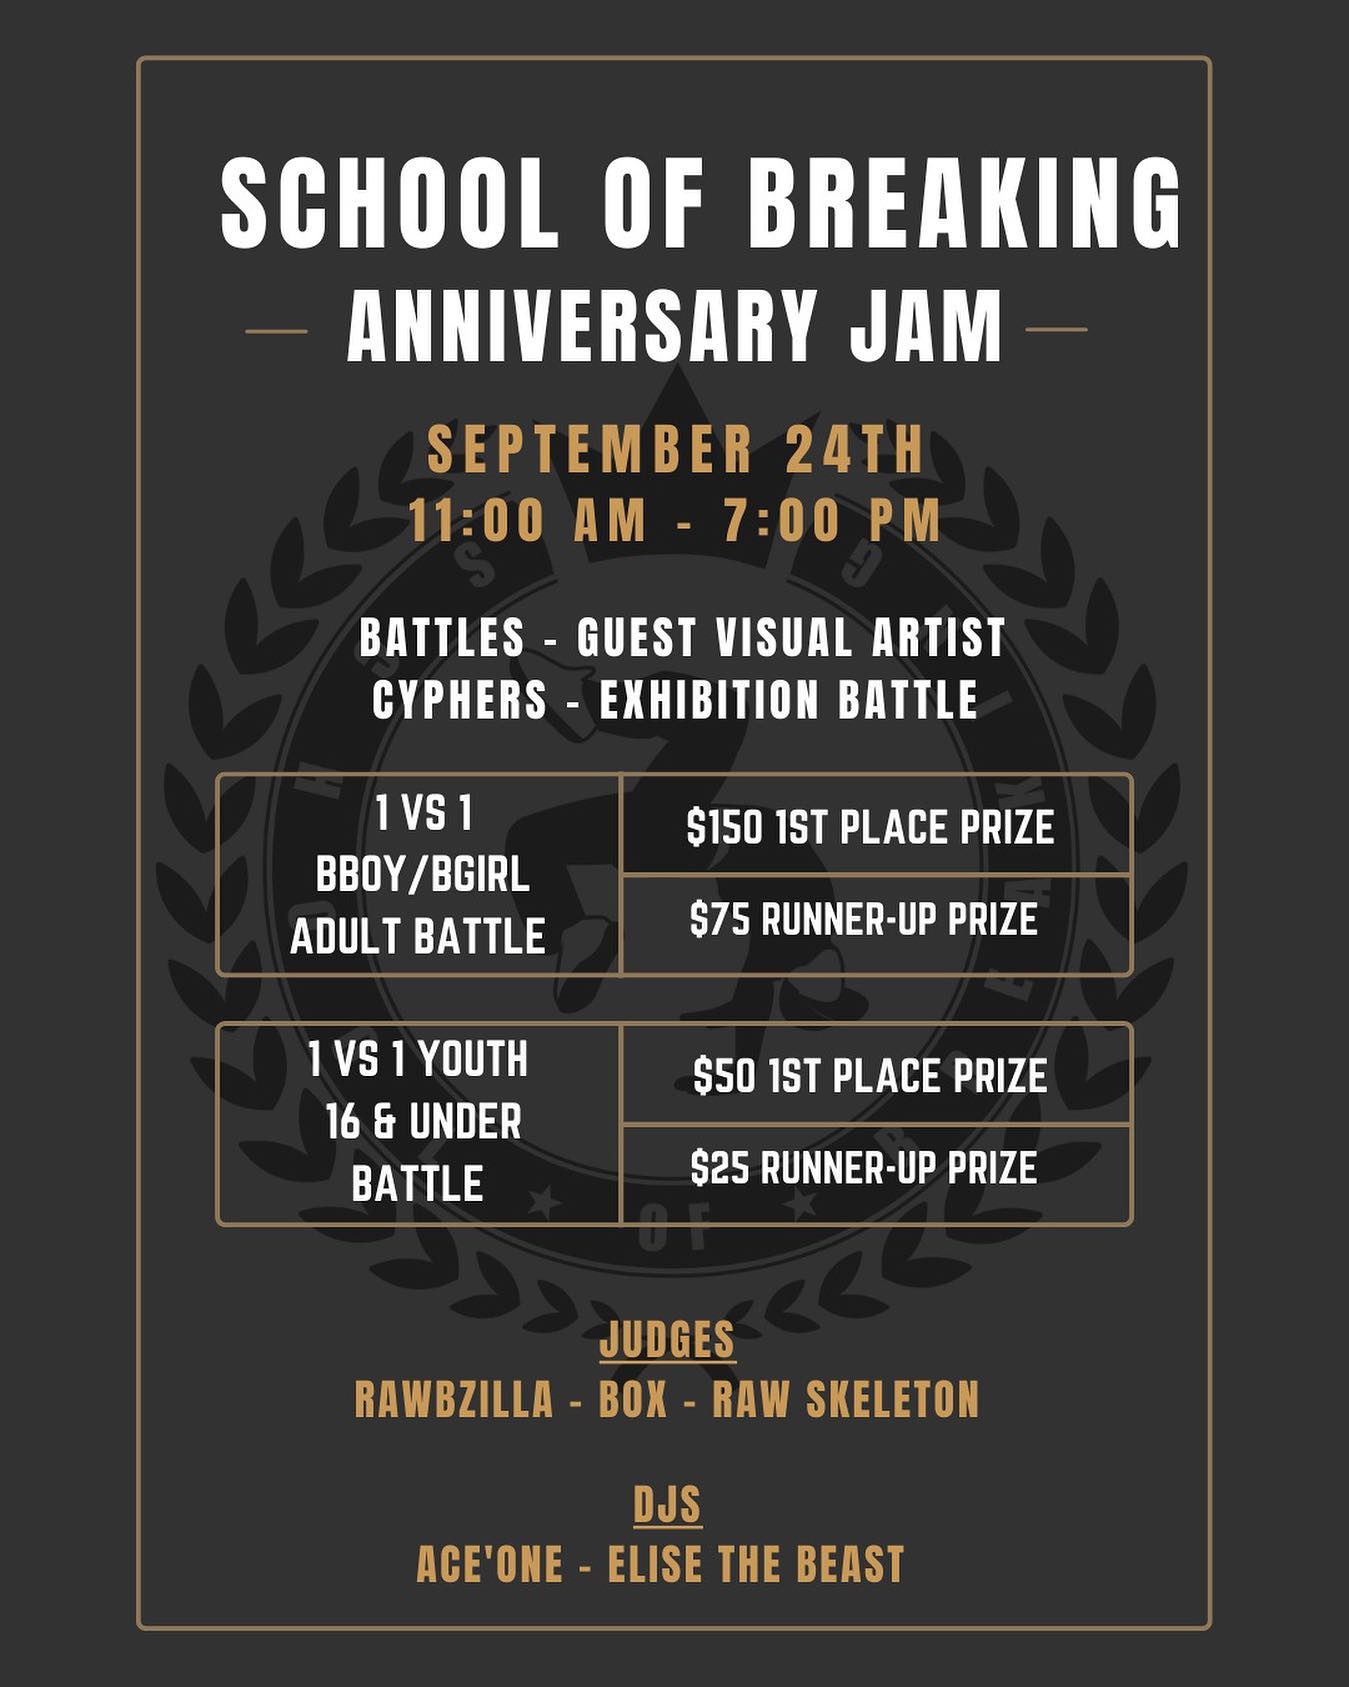 Going down NEXT WEEKEND!  Don’t miss our 10 year Anniversary Jam. 

💥 1 vs 1 Adult Bboy/Bgirl Battles 
💥1 vs 1 Youth 16 & under Battles 
💥Exhibition Battle 
@selfreflectz vs @snoozejuststeezing_

💥Judges:
@bboyrawbzilla @boximusprime @sunraw_tfs 

💥DJs @eliselabeast @aceonemusic providing sounds for the event + a special live visual artist joining them

SAVE THE DATE! We can’t wait to celebrate with the community.

For more information link in our bio 

#schoolofbreaking #bboy #bgirl #HipHop #streetdance #culture #breaking #event #cypher #hiphopevent #freestyle #coloradohiphop #dancer #artist #expressfreely #peace #love #unity #havingfun